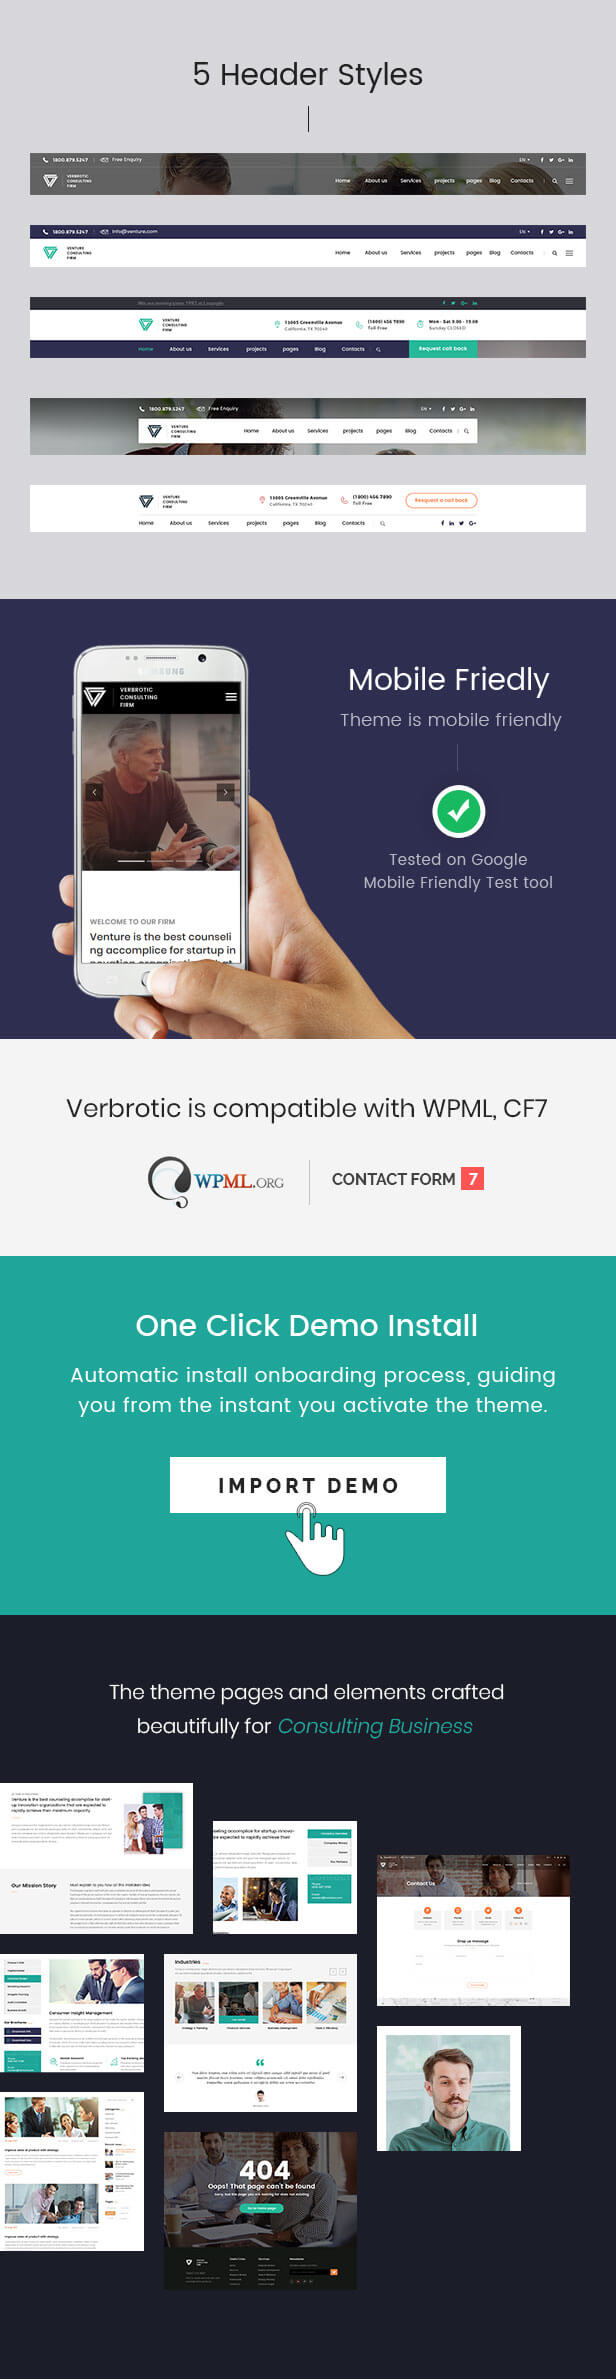 Verbrotic : Business Consulting WordPress Theme - 3